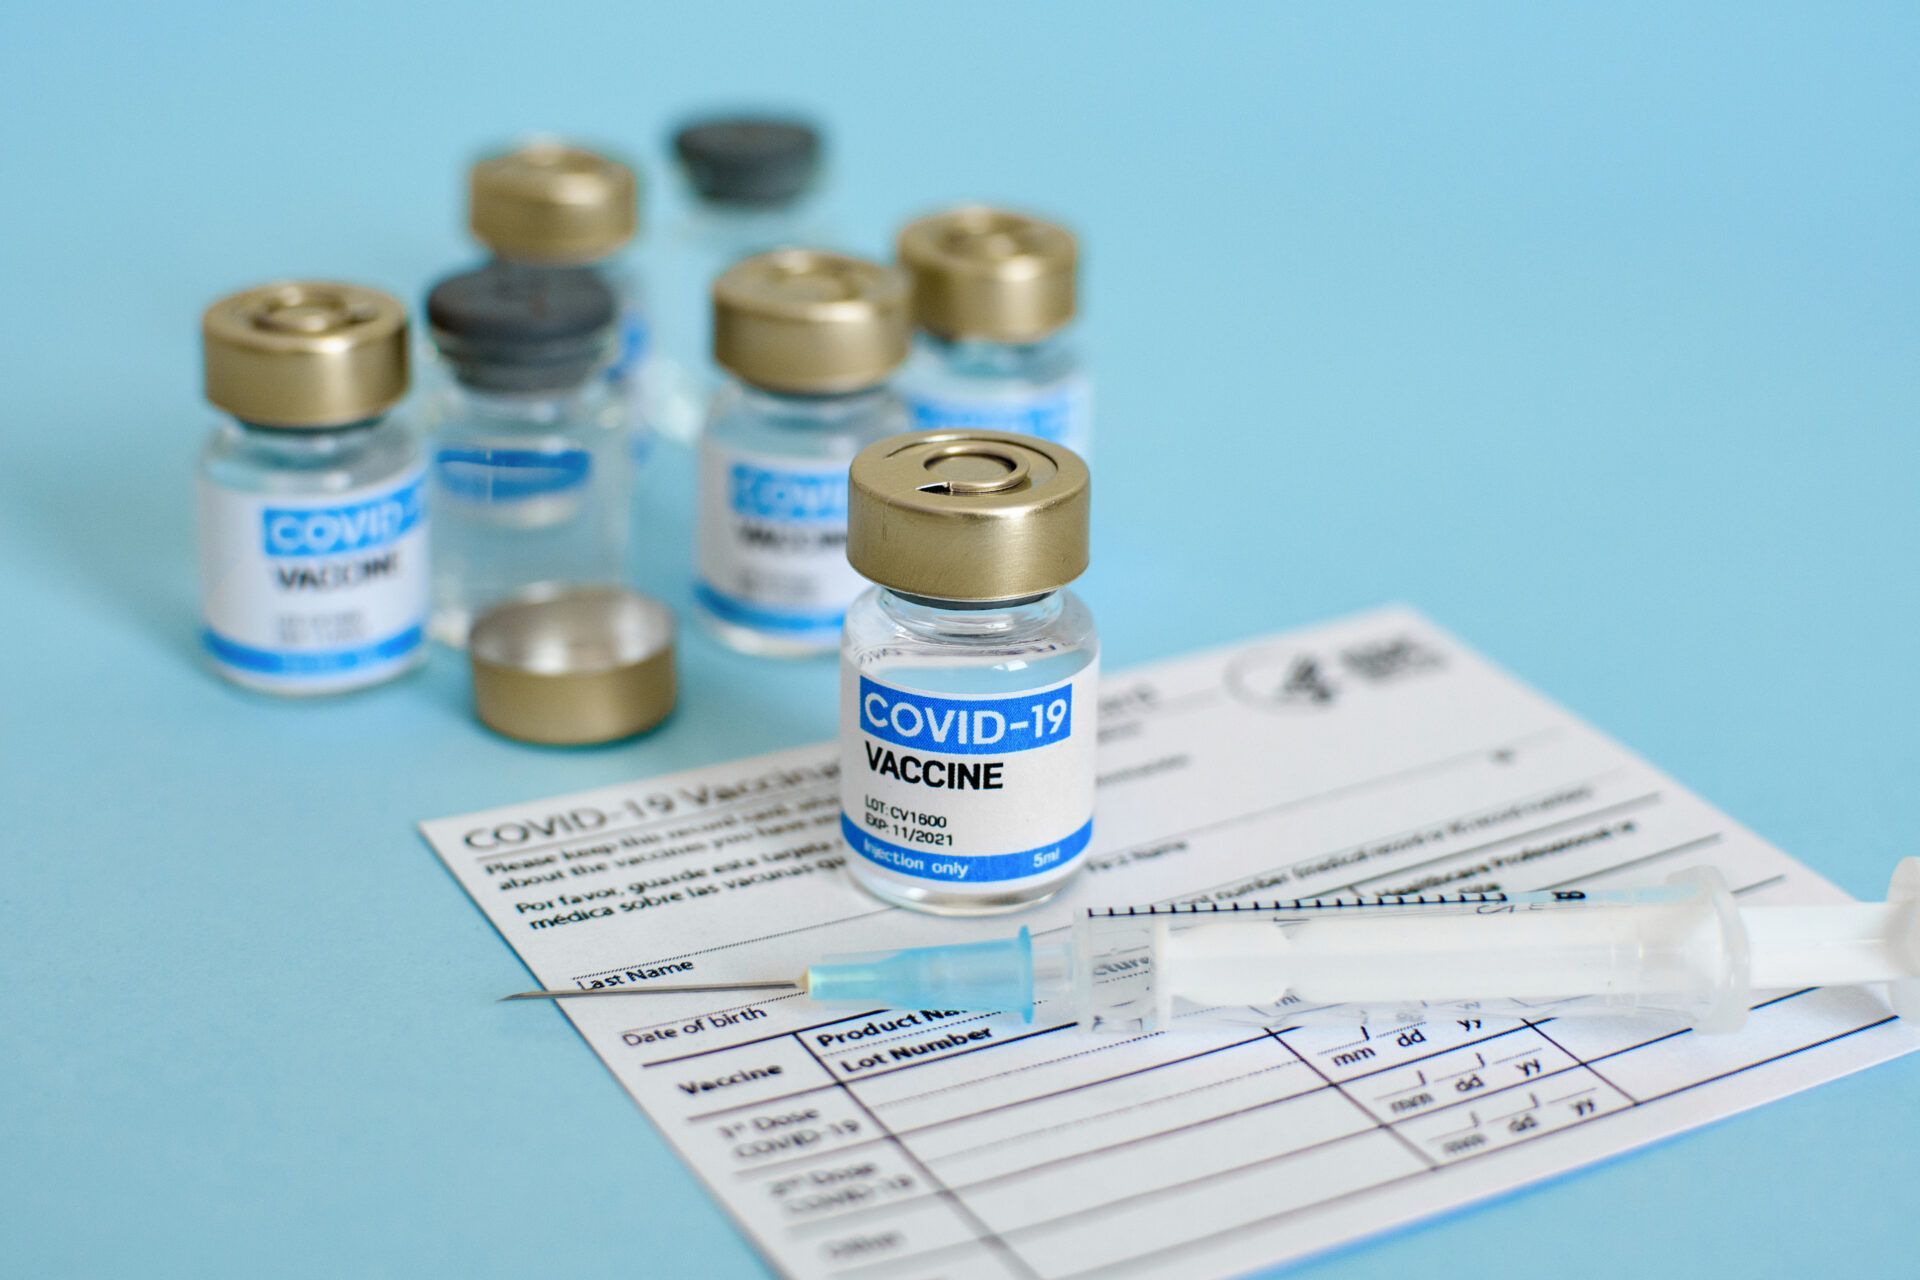 Close-up image of vaccine vial and syringe on CDC covid-19 vaccination record card